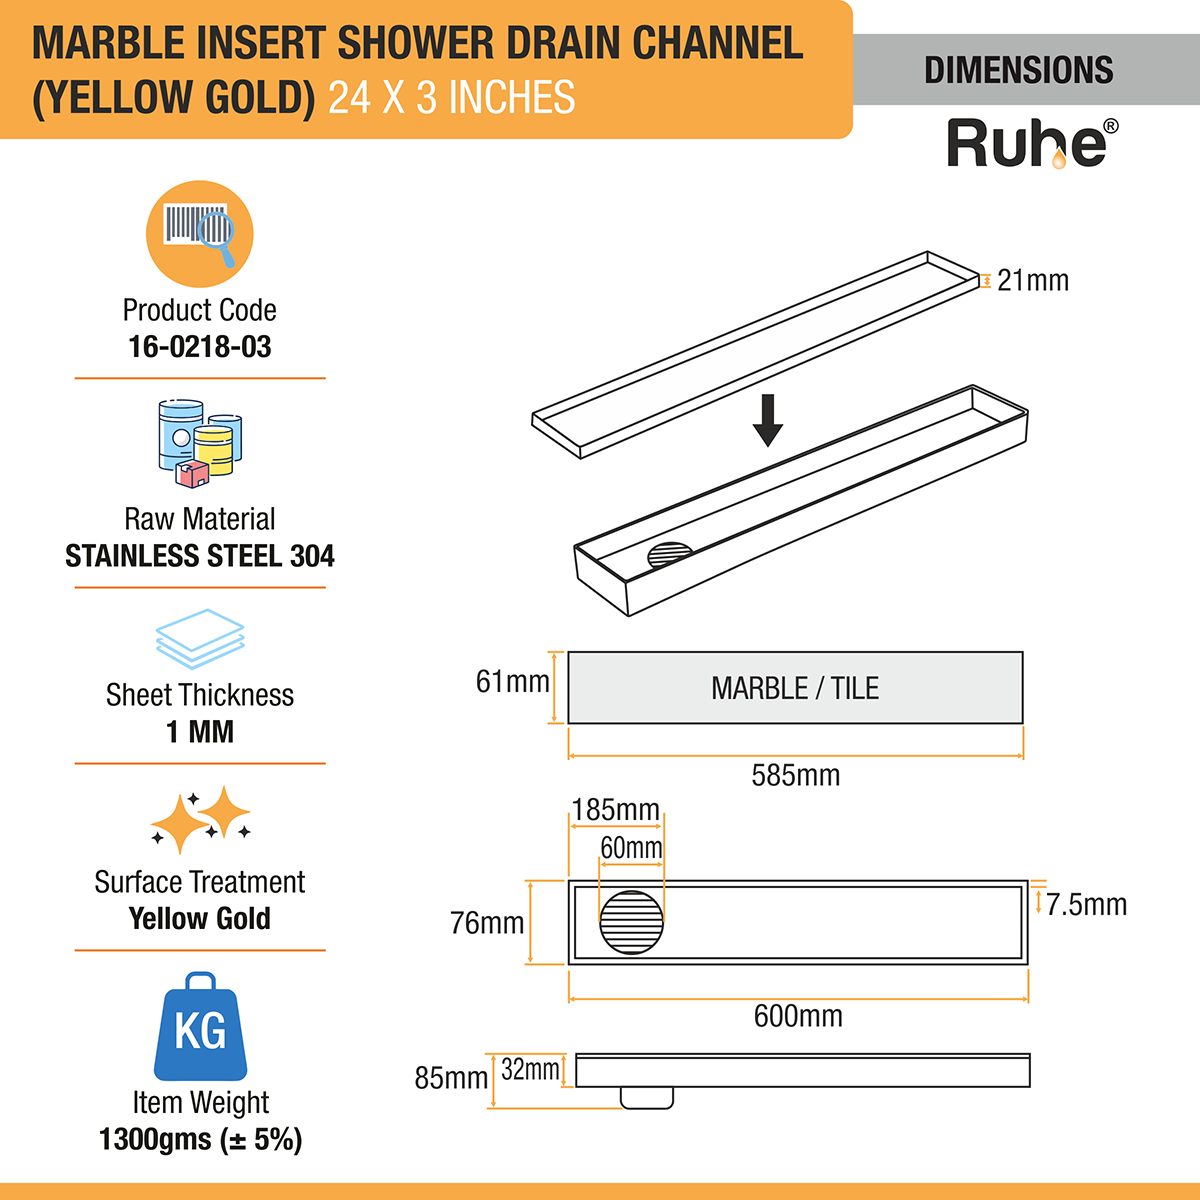 Marble Insert Shower Drain Channel (24 x 3 Inches) YELLOW GOLD PVD Coated dimensions and sizes